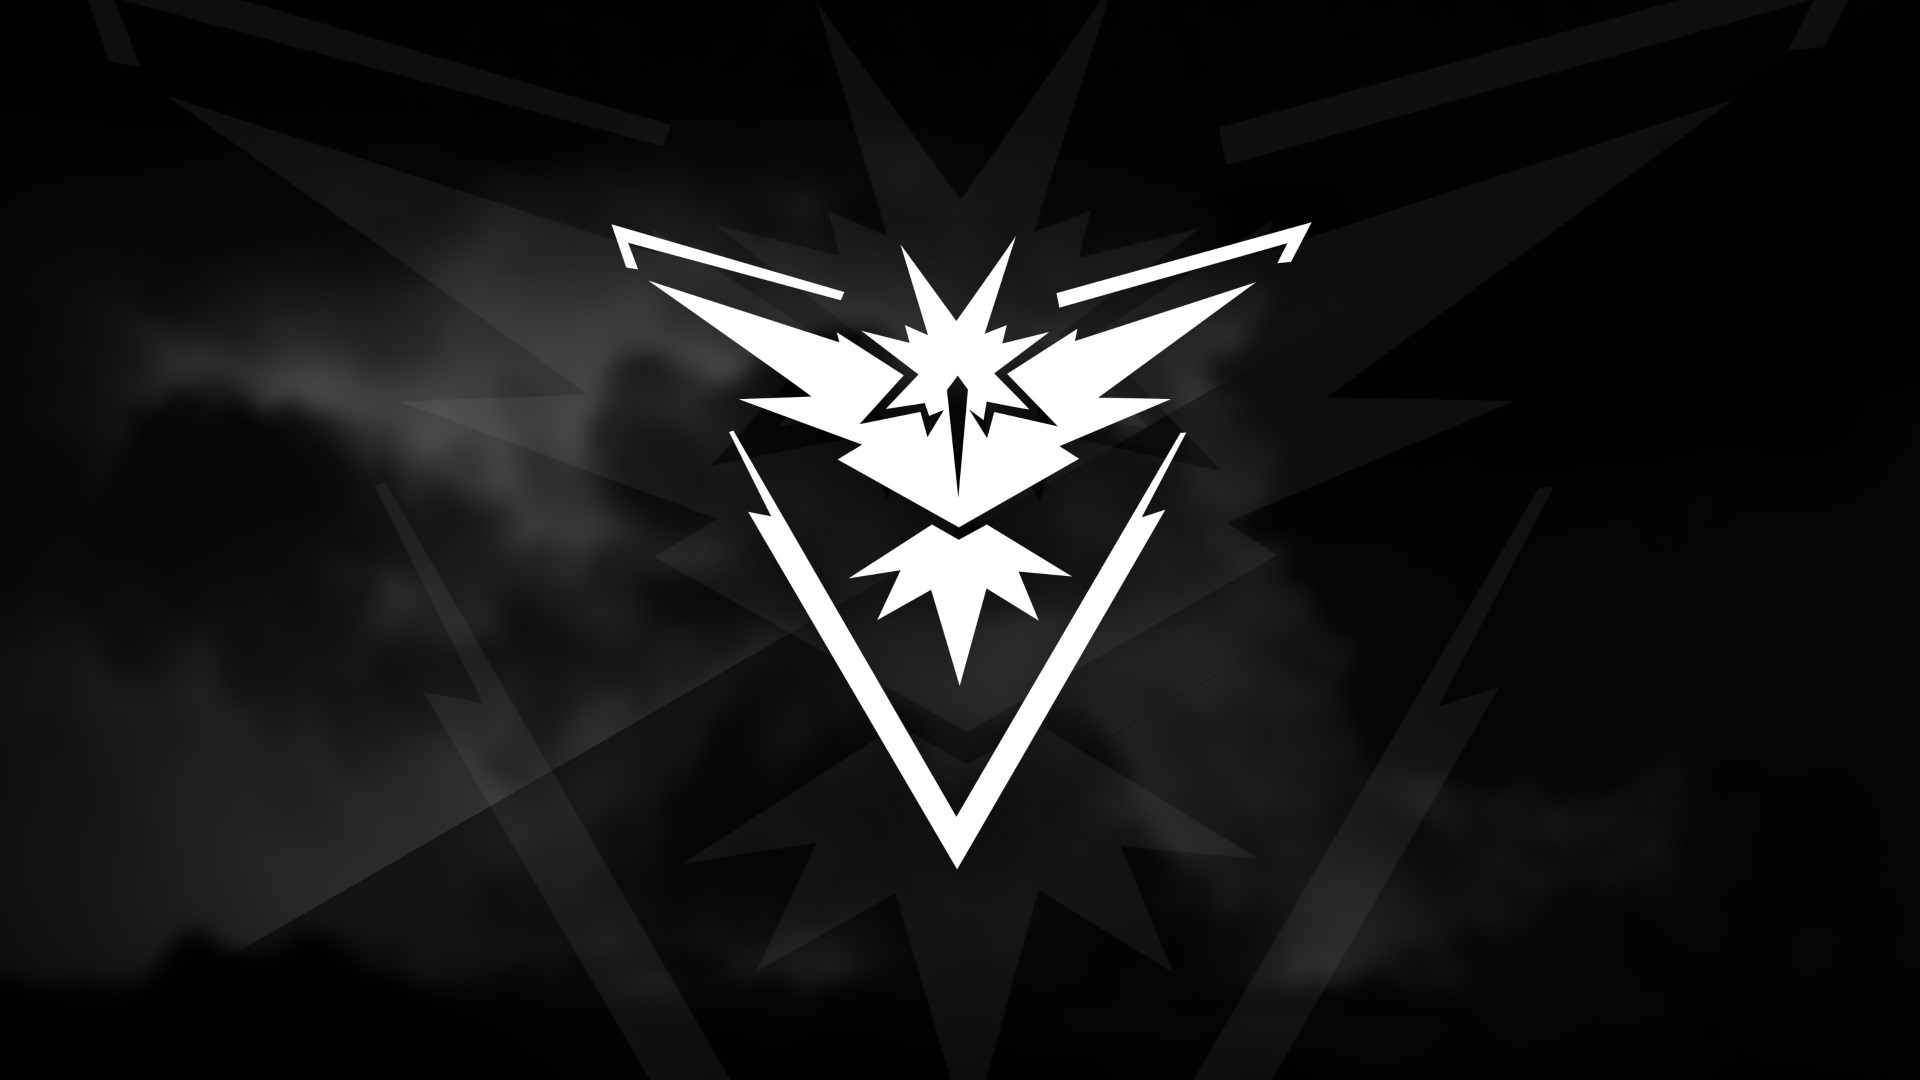 1920x1080 Team Instinct in black and white by Tommaso Tabacchi